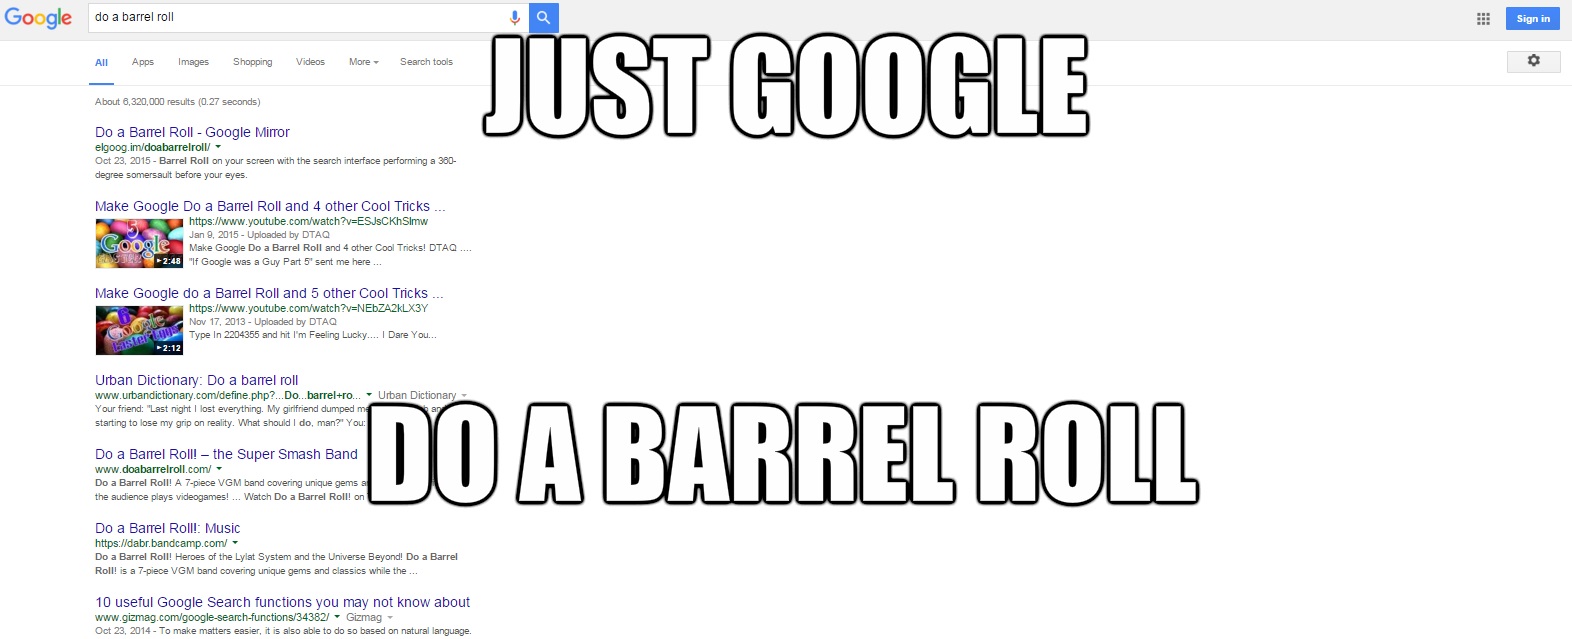 kayastha - Google do a barrel roll Sign in All Apps Images Shopping Videos More Search tools Just Google About 0,320,000 results 0.27 seconds Do a Barrel Roll Google Mirror elgoog.imdoabarrelroll Barrel Roll on your screen with the search interface perfor